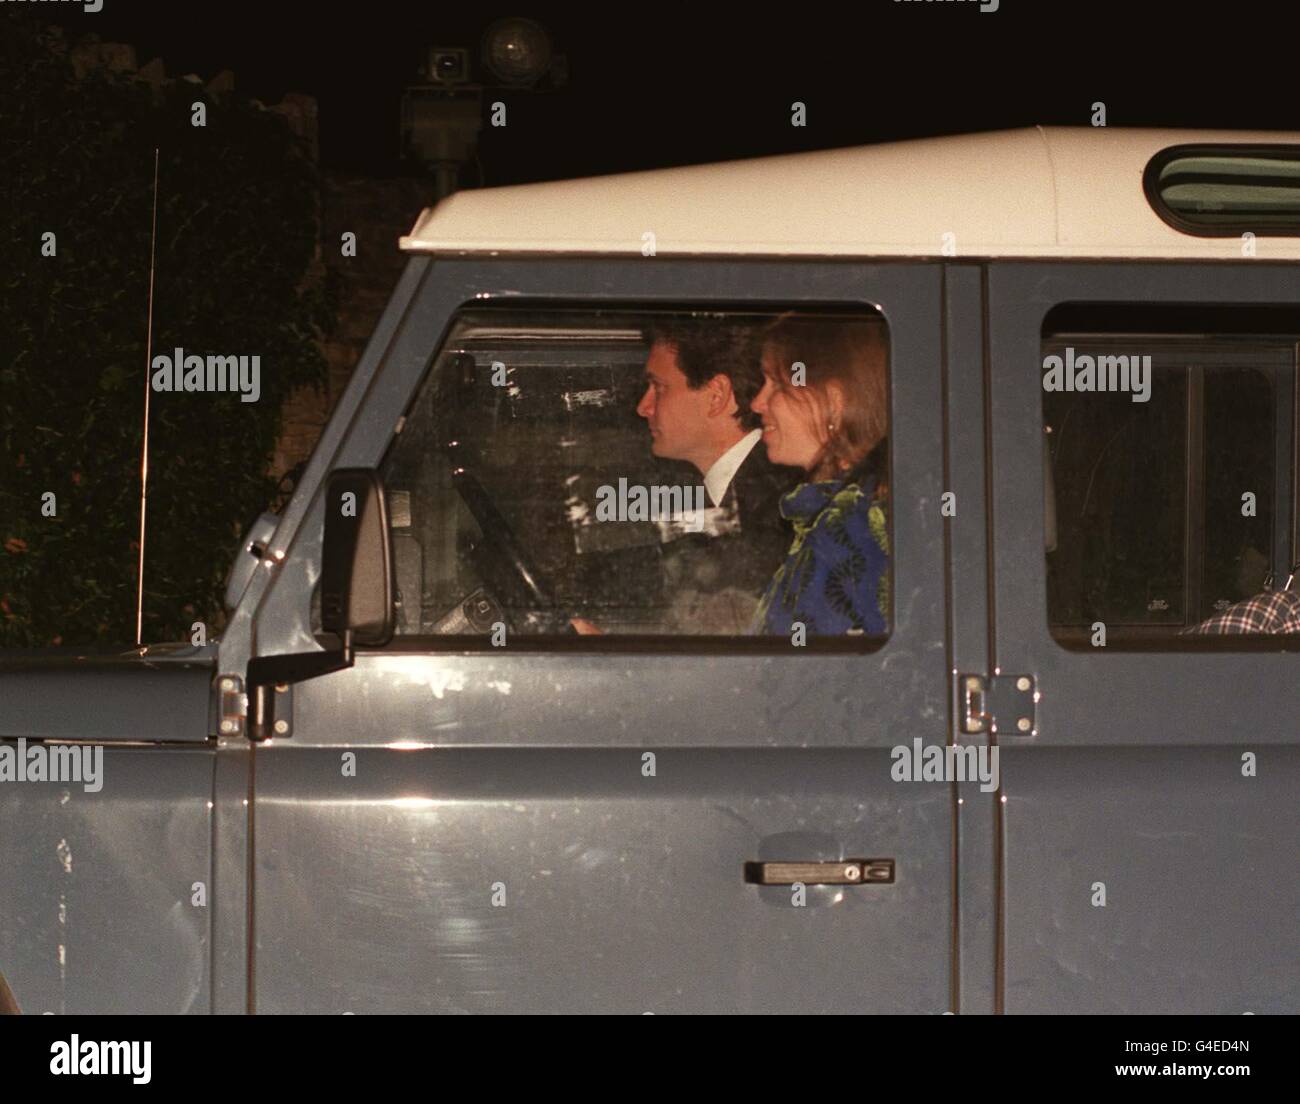 PA NEWS 31/7/98 LADY SARAH (DAUGHTER OF PRINCESS MARGARET) AND HER HIUSBAND DANIEL CHATTO ARRIVE AT THE PRINCE OF WALES' GLOUCESTERSHIRE HOME, HIGHGROVE, WHERE HIS SONS, WILLIAM AND HARRY, WERE PUTTING ON A PLAY FOR THEIR FATHER, WHO CELEBRATES HIS 50TH BIRTHDAY LATER IN THE YEAR. Stock Photo